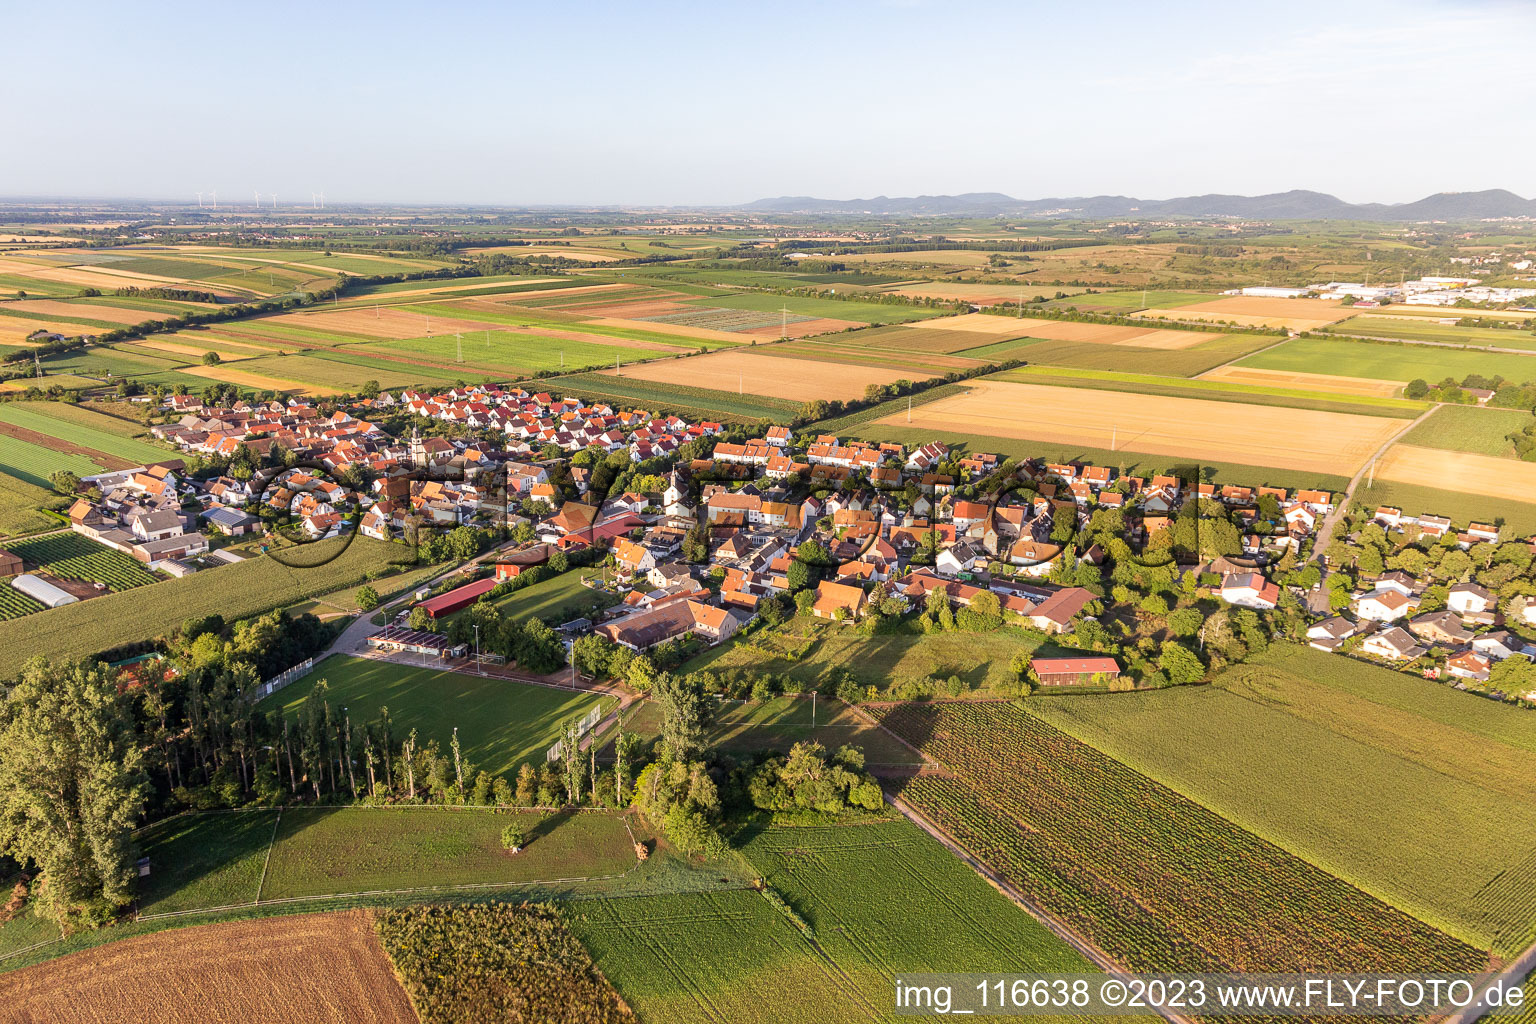 Aerial view of Village - view on the edge of agricultural fields and farmland in the district Moerlheim in Landau in der Pfalz in the state Rhineland-Palatinate, Germany